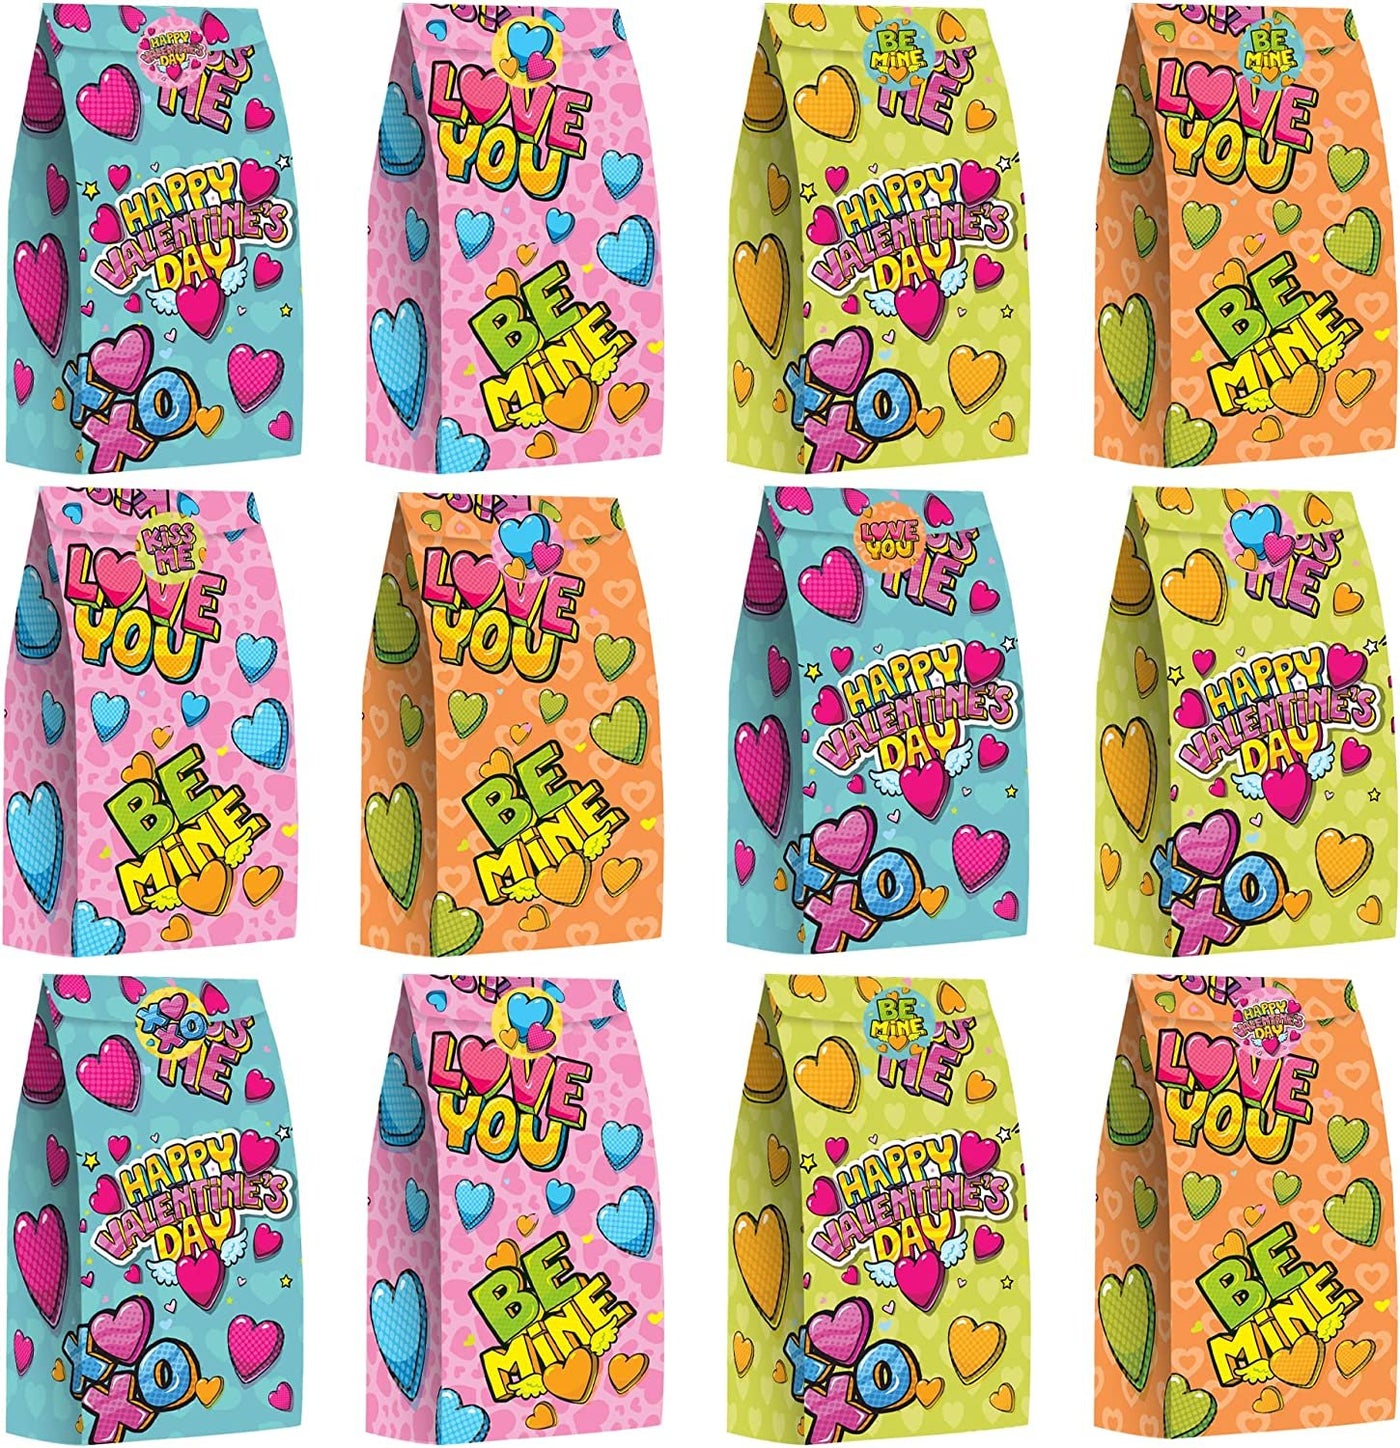 10" Valentines Day Treat Bags, Set of 24 Paper Candy Bags & 24 Stickers and More